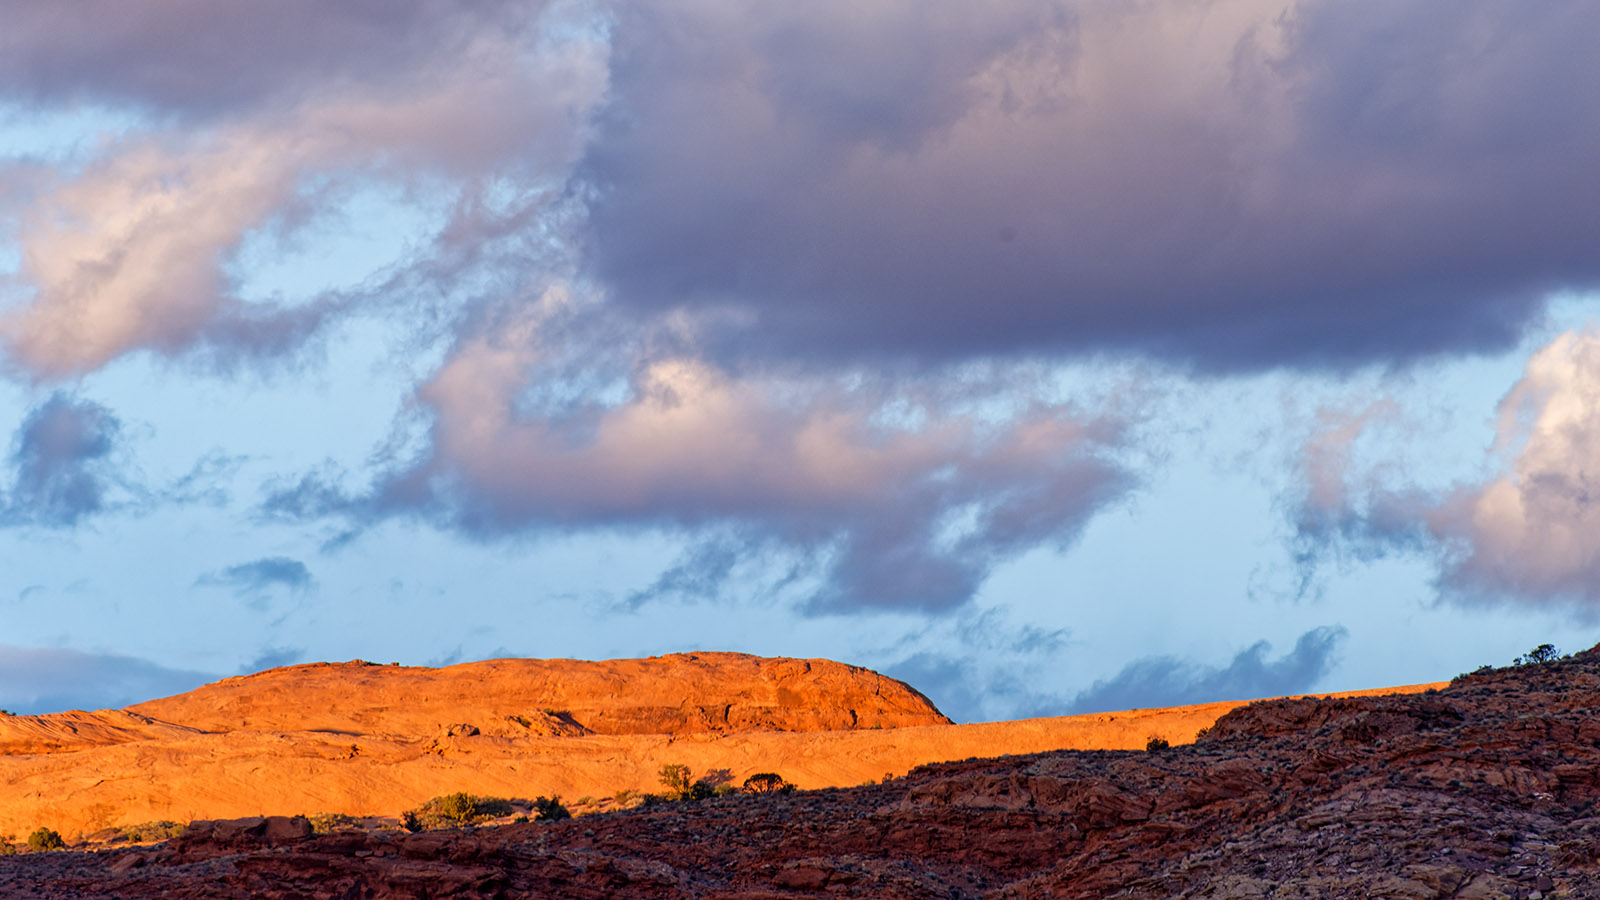 Evening light in Moab